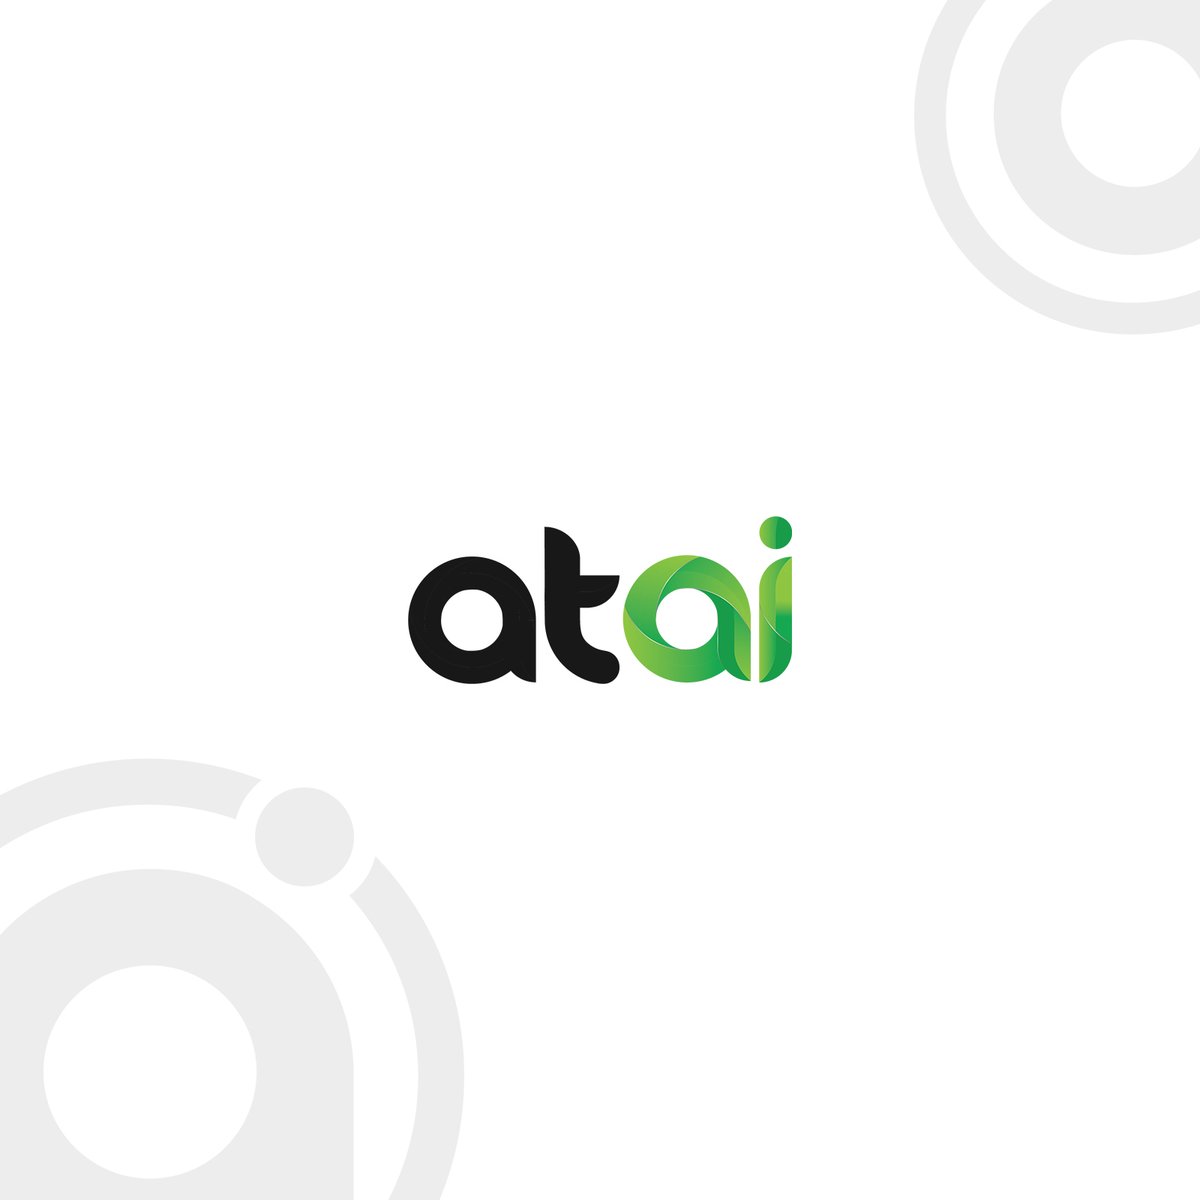 We're thrilled to reveal our updated logo, a fresh take that reflects who we are today. This isn't just a change in design - It embodies a modern, dynamic spirit that reflects our commitment to innovation and a progressive approach.

#ATAI #Newlogo #rebranding